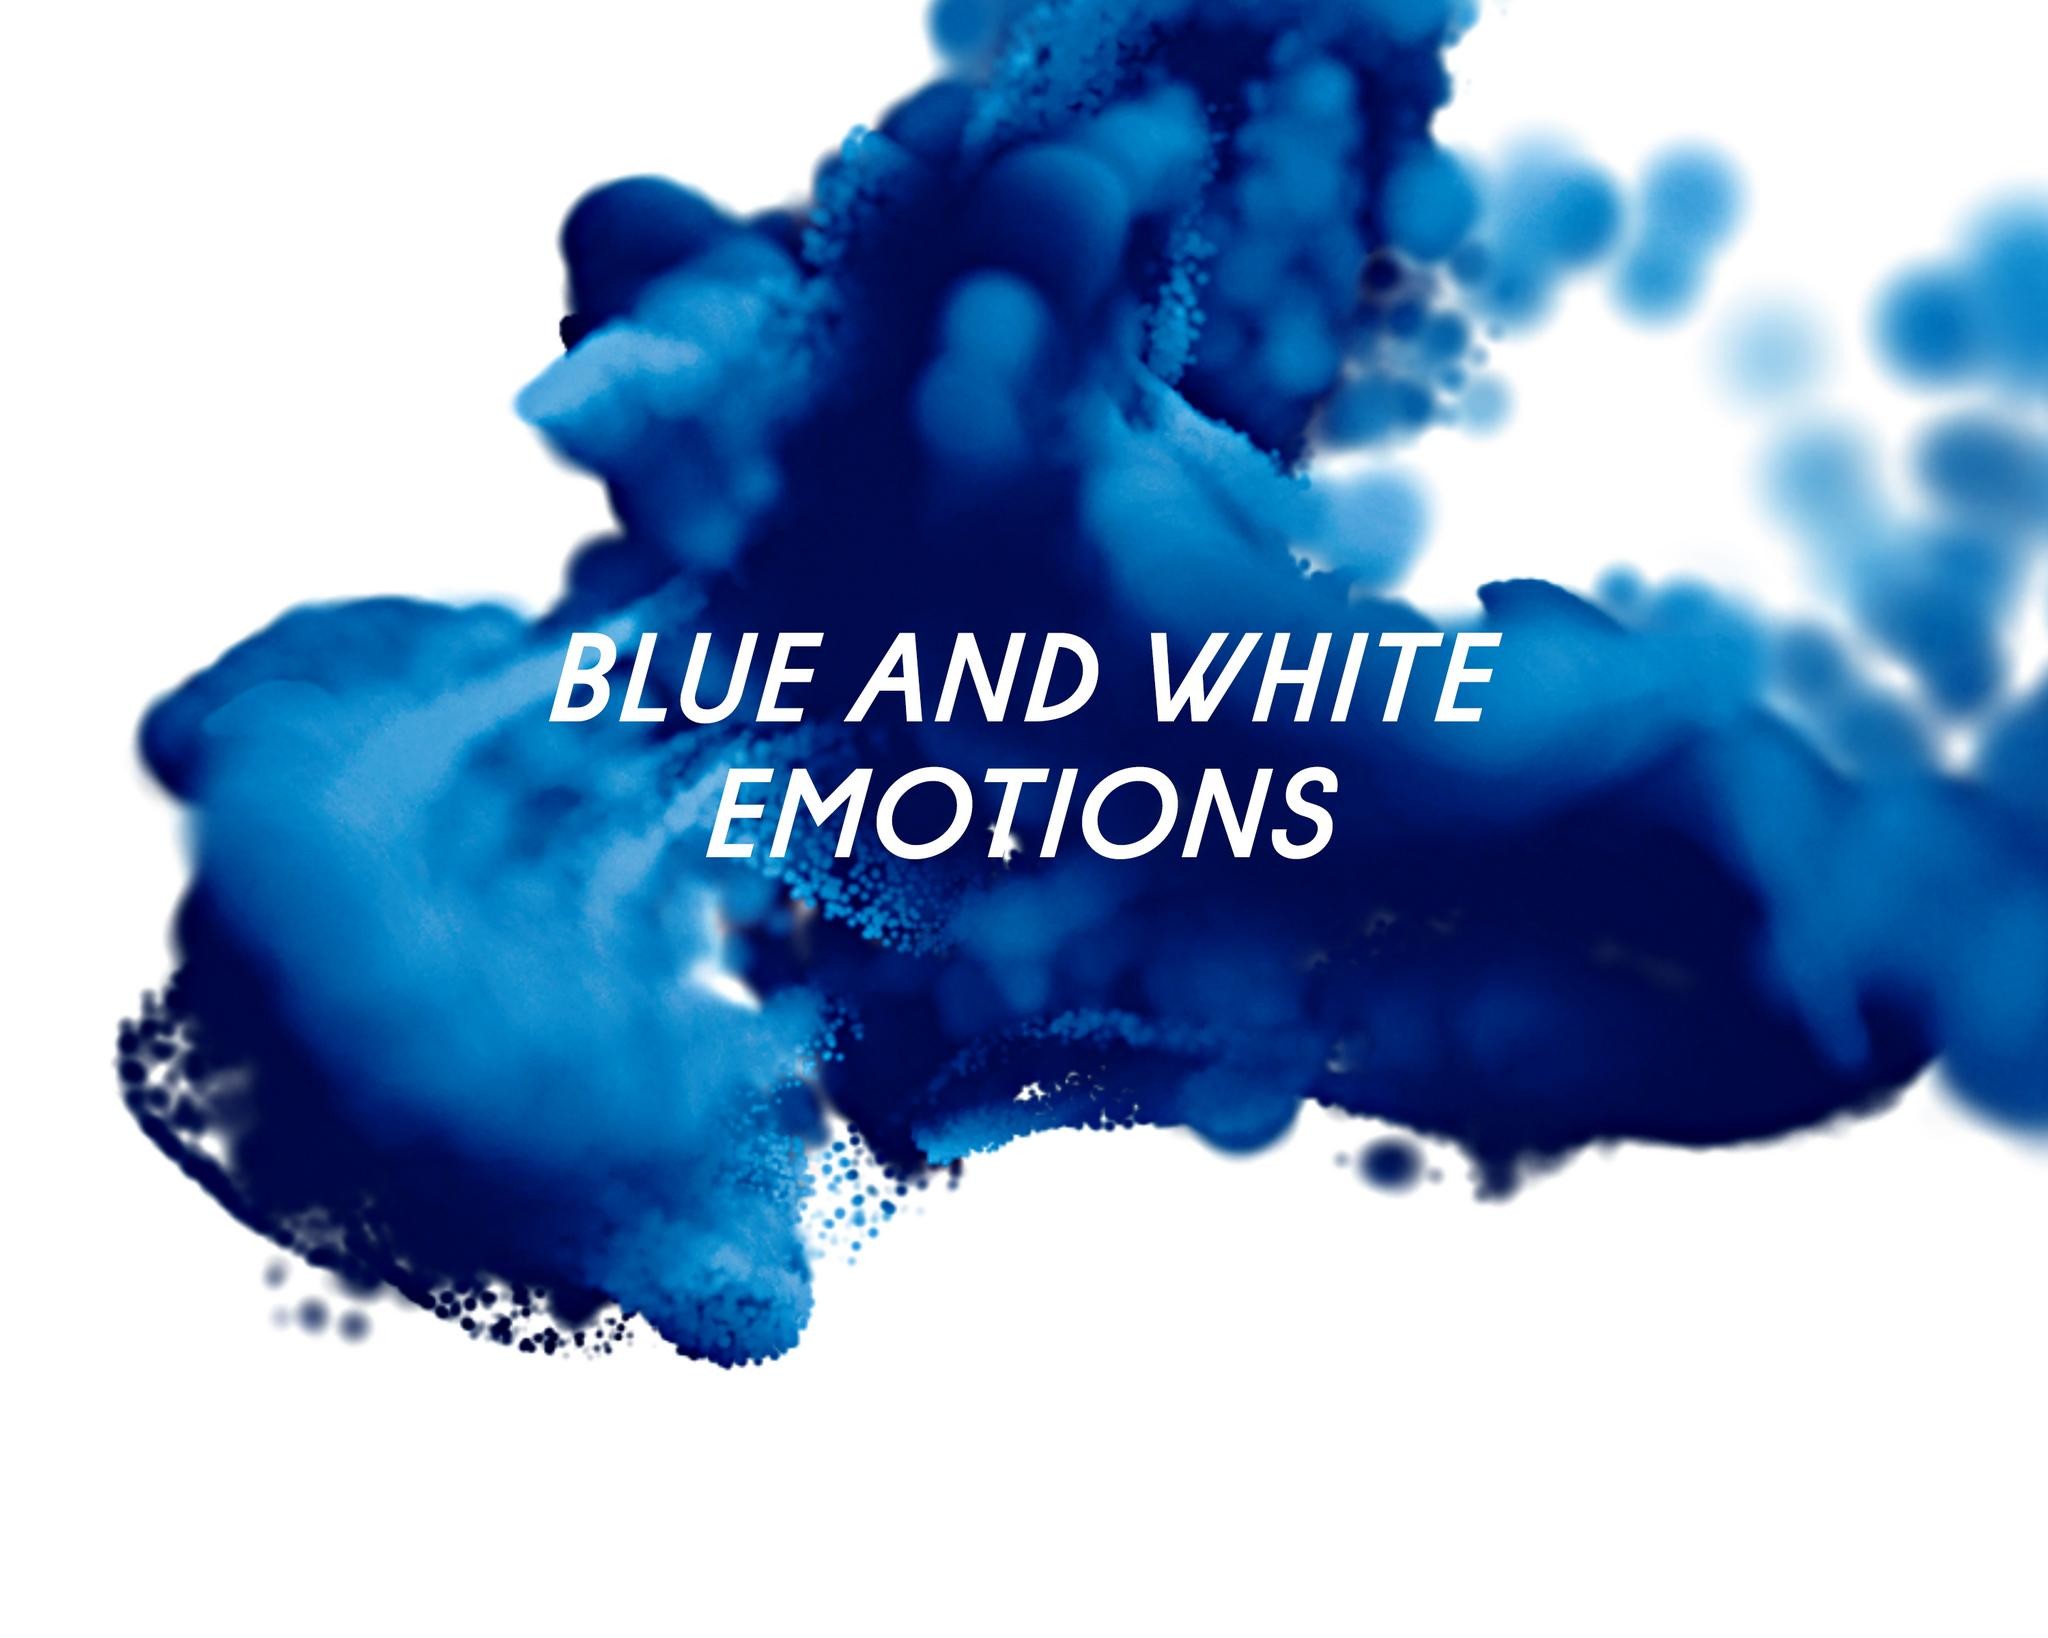 Blue and white emotions